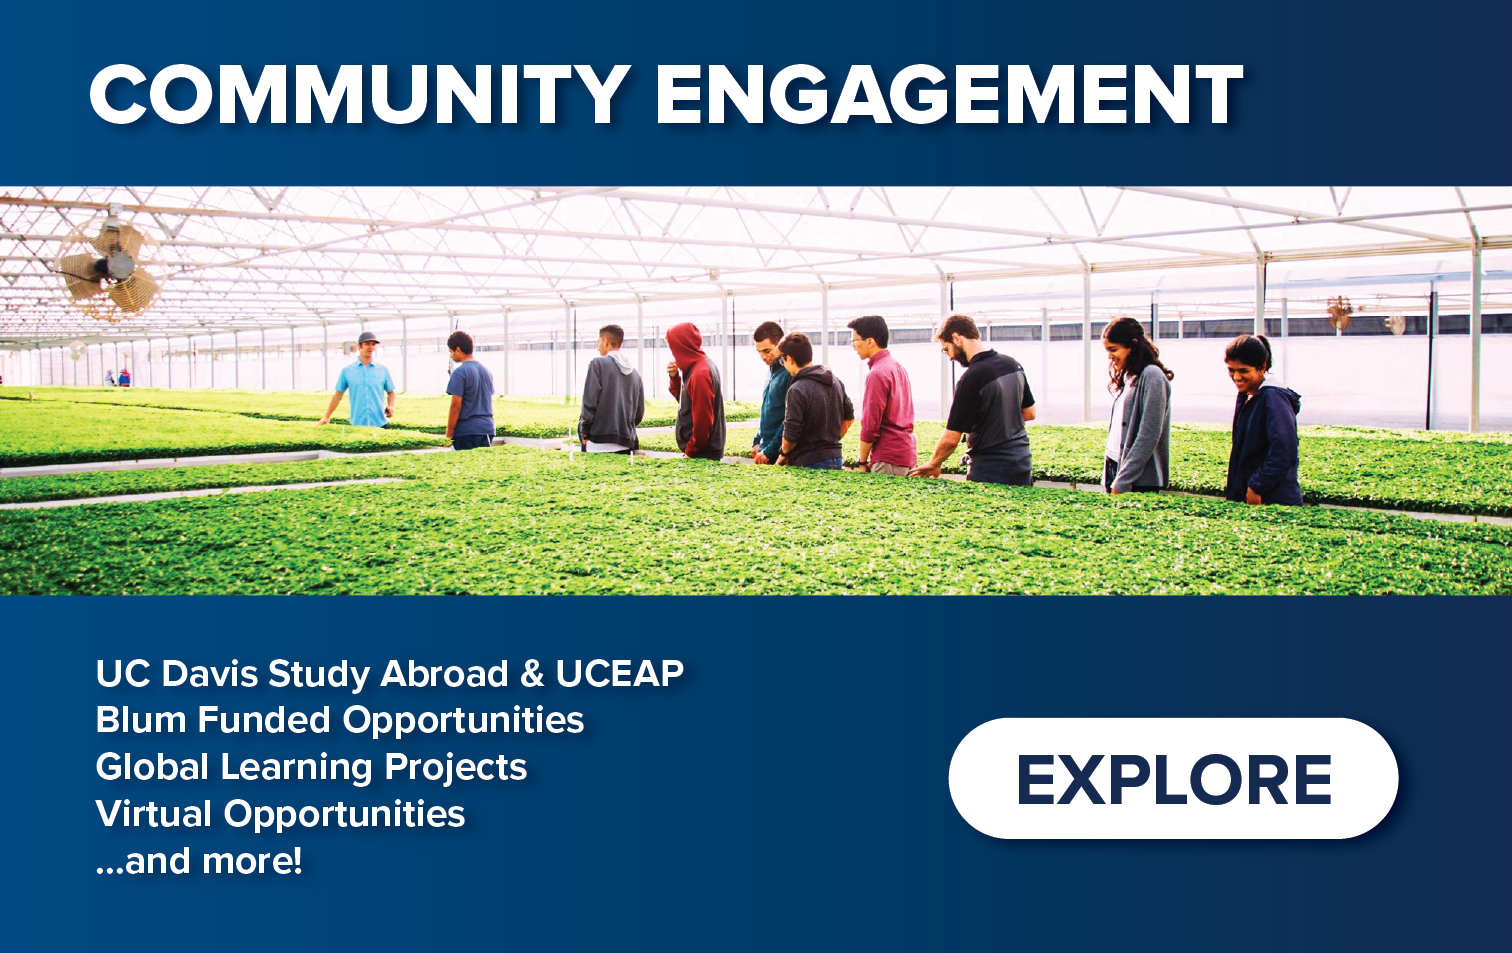 Teaser Image - Click to learn more about Community Engagement opportunities